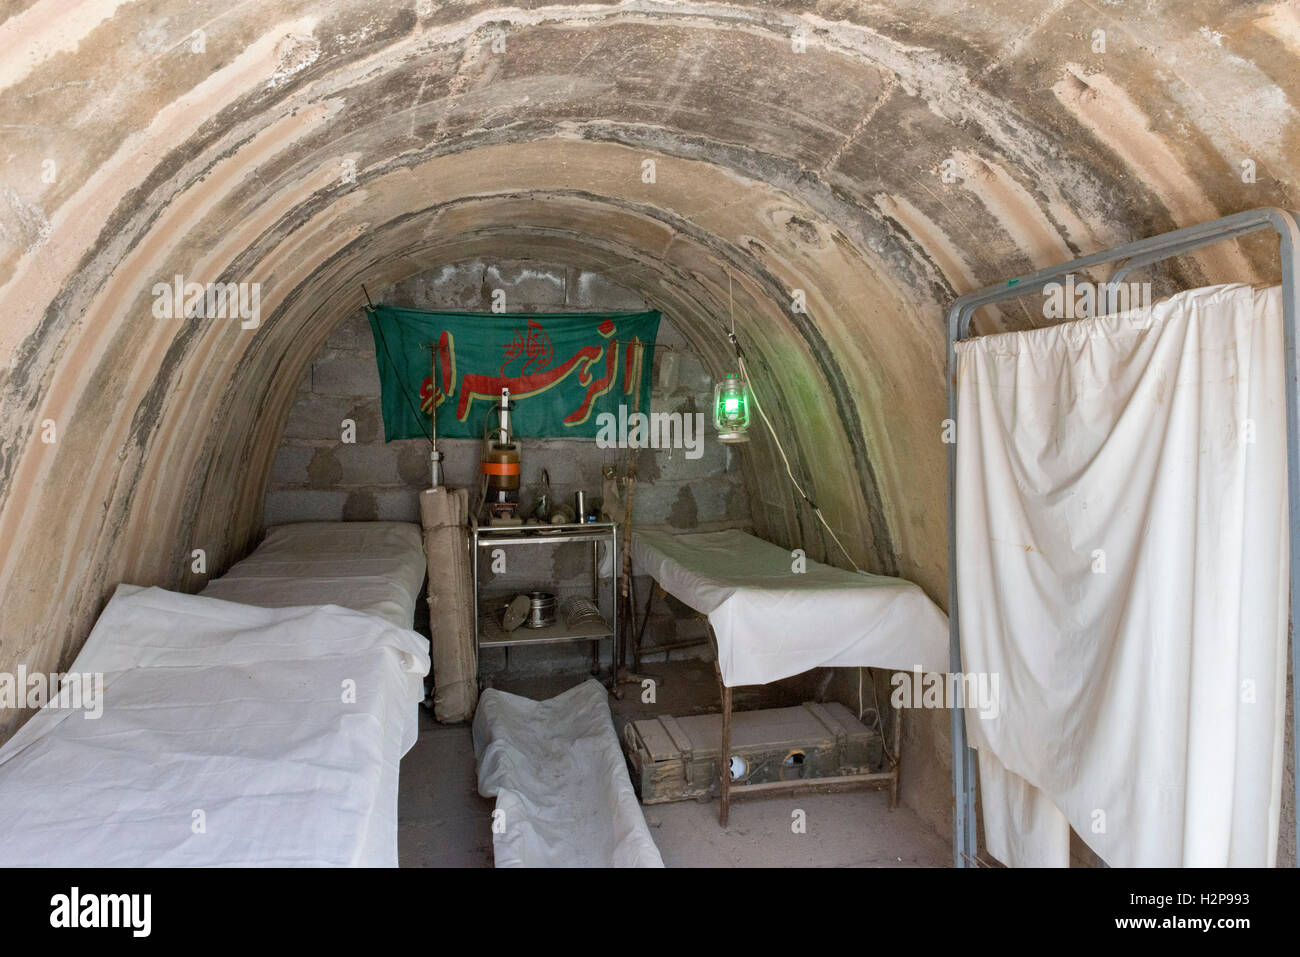 Kerman, Museum Of The Holy Defence, Hospital Beds Inside Iraqi War Bunker Stock Photo